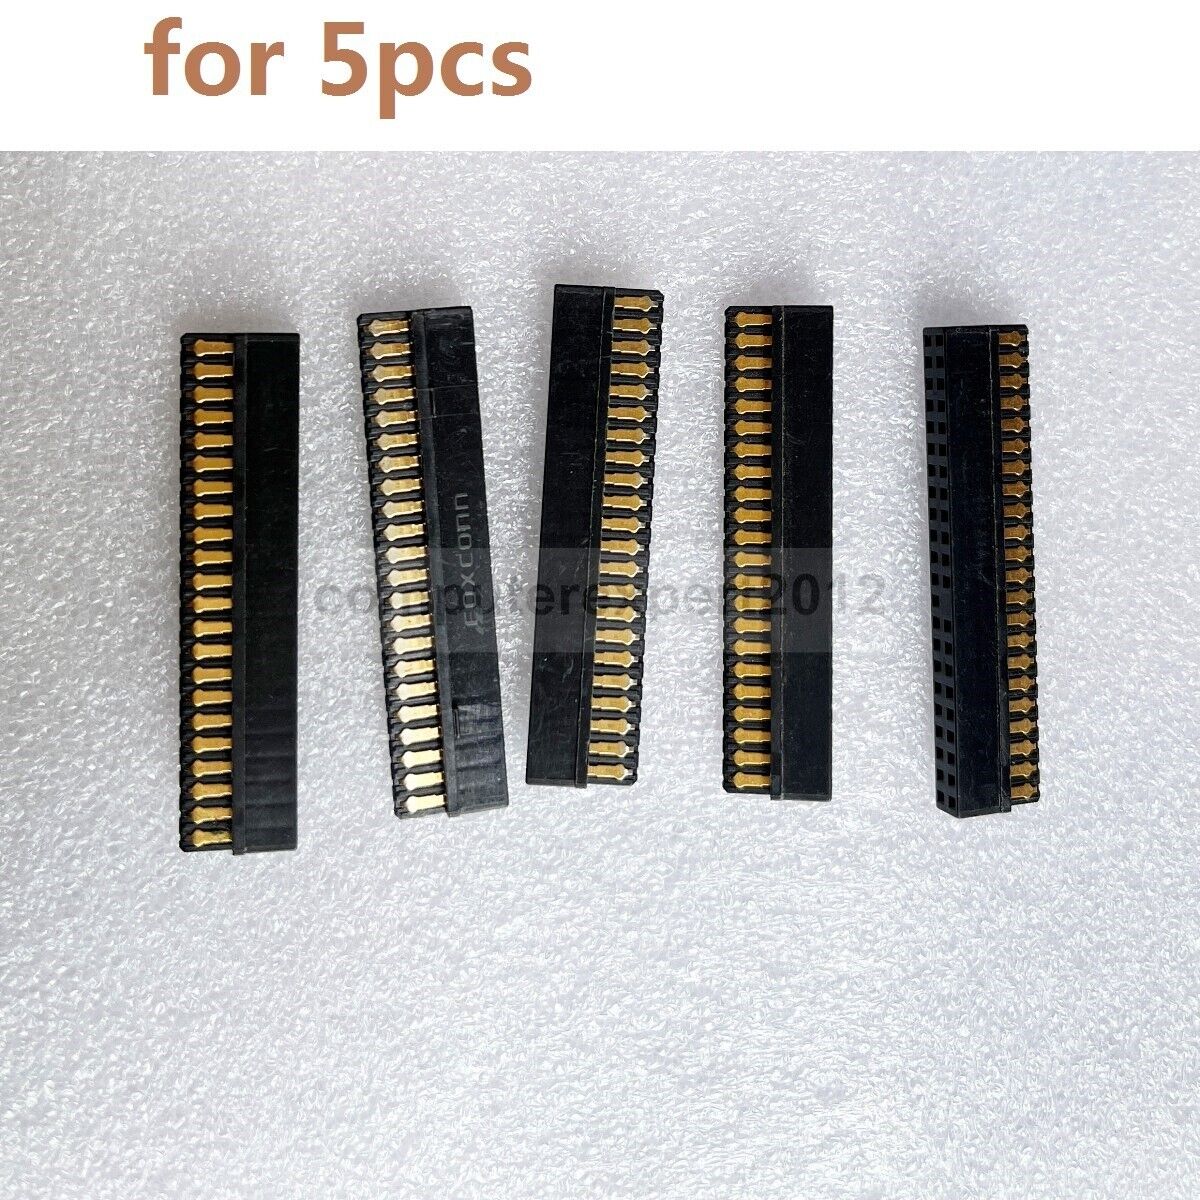 Lot 5pcs - 44pin IDE HDD Hard Drive Connector Adapter Interposer for Dell Laptop